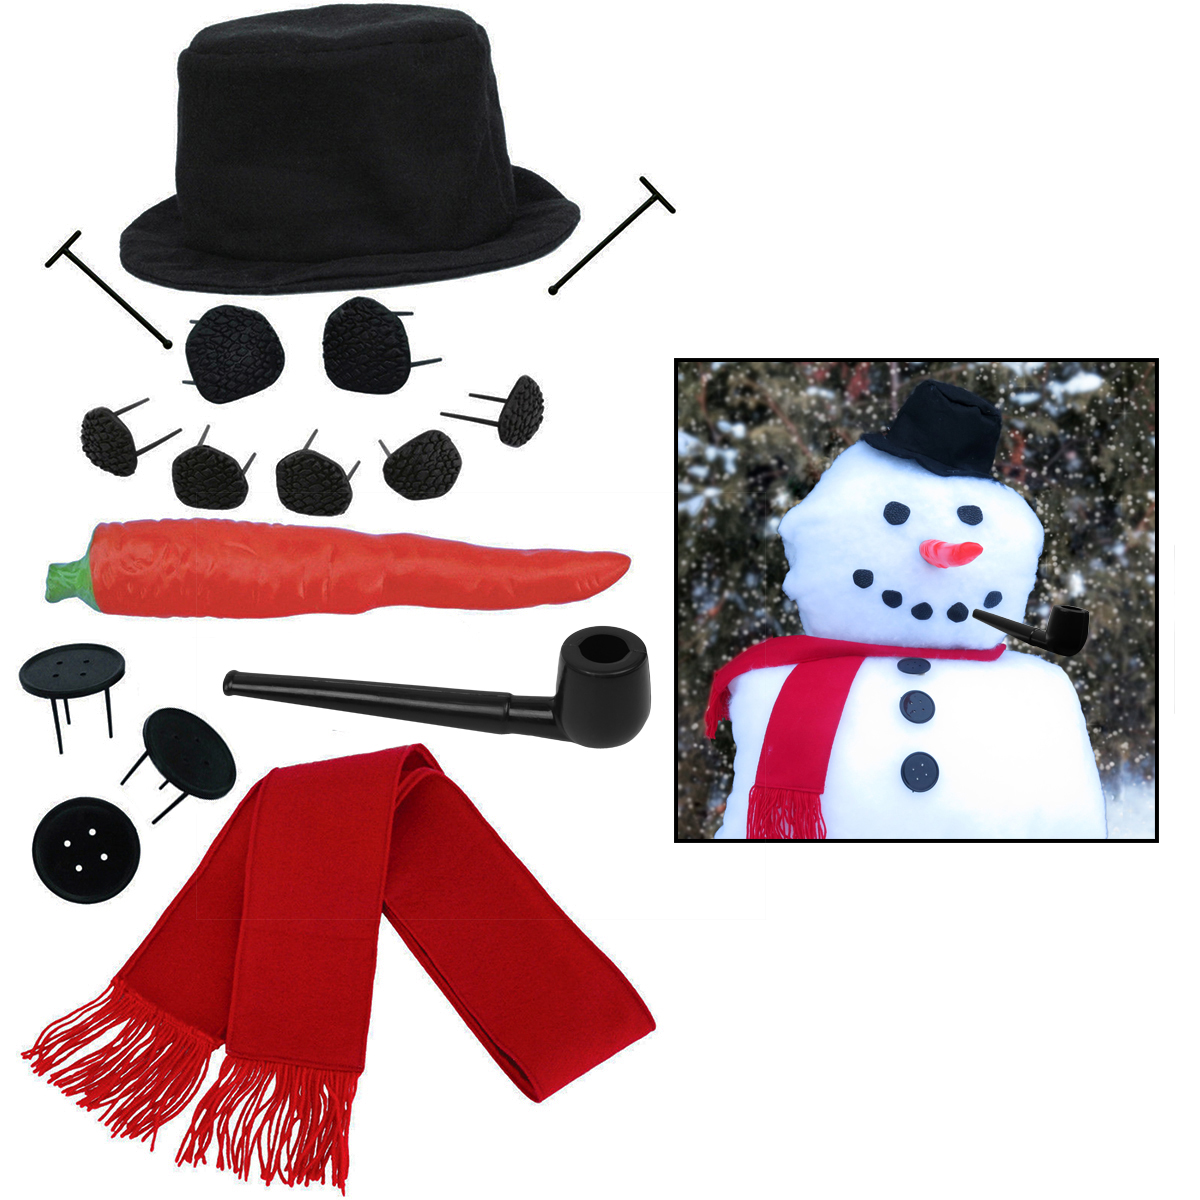 Evelots Perfect Snowman Decorating Kit-15 Pieces-Entire Family Fun-Sturdy Prongs - image 1 of 6